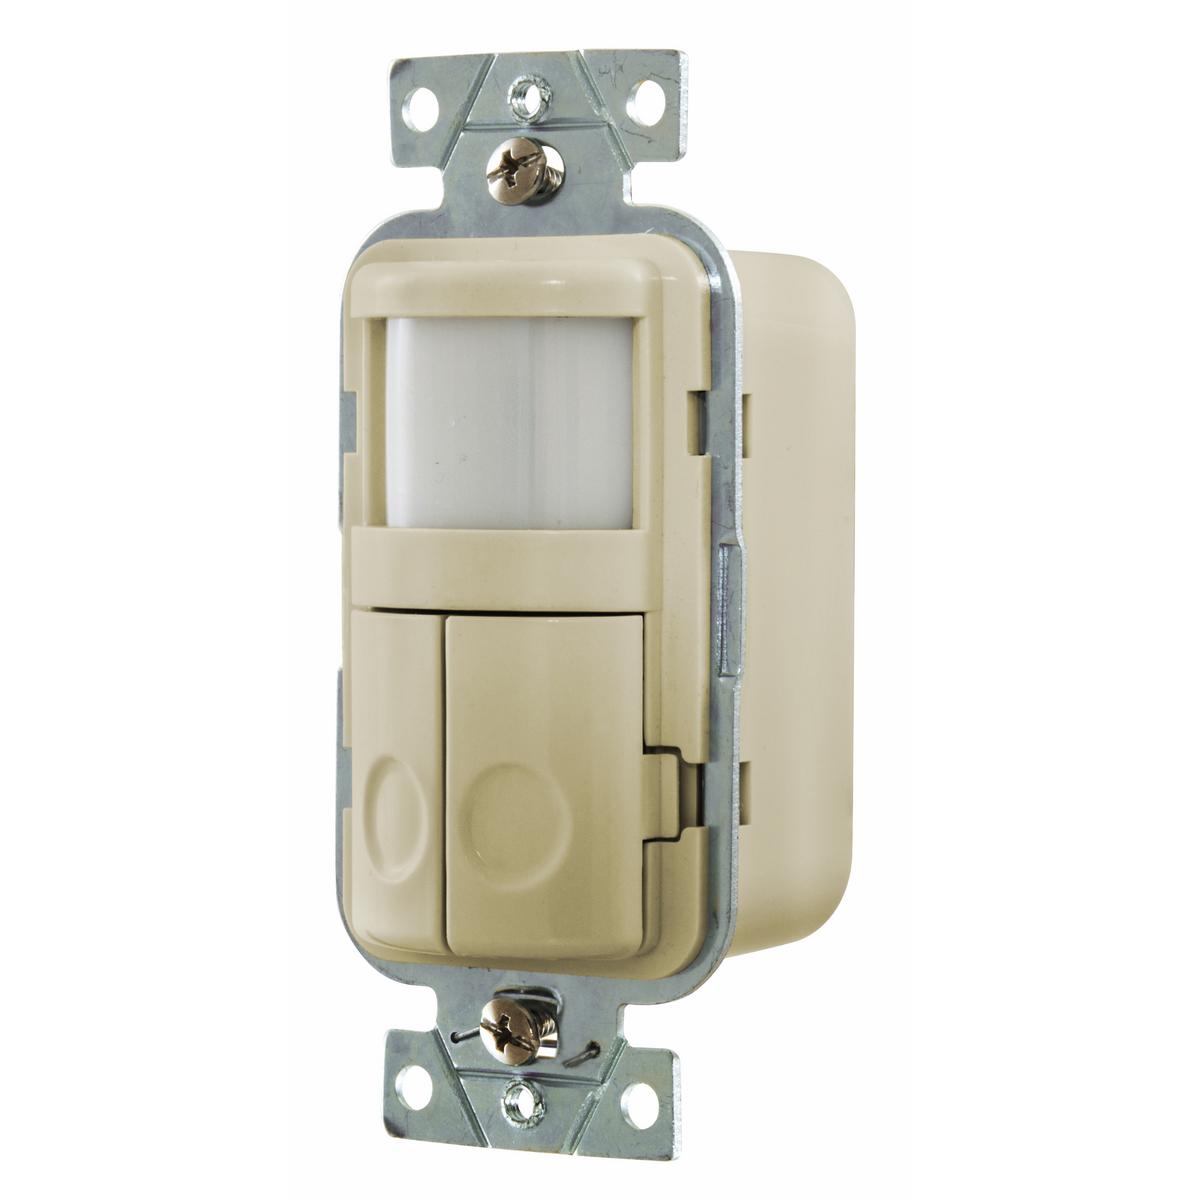 Hubbell WS1021I Lighting Control, Vacancy Sensor, PassiveInfrared, 120V AC, 2-Circuit, Ivory  ; No Neutral ; 